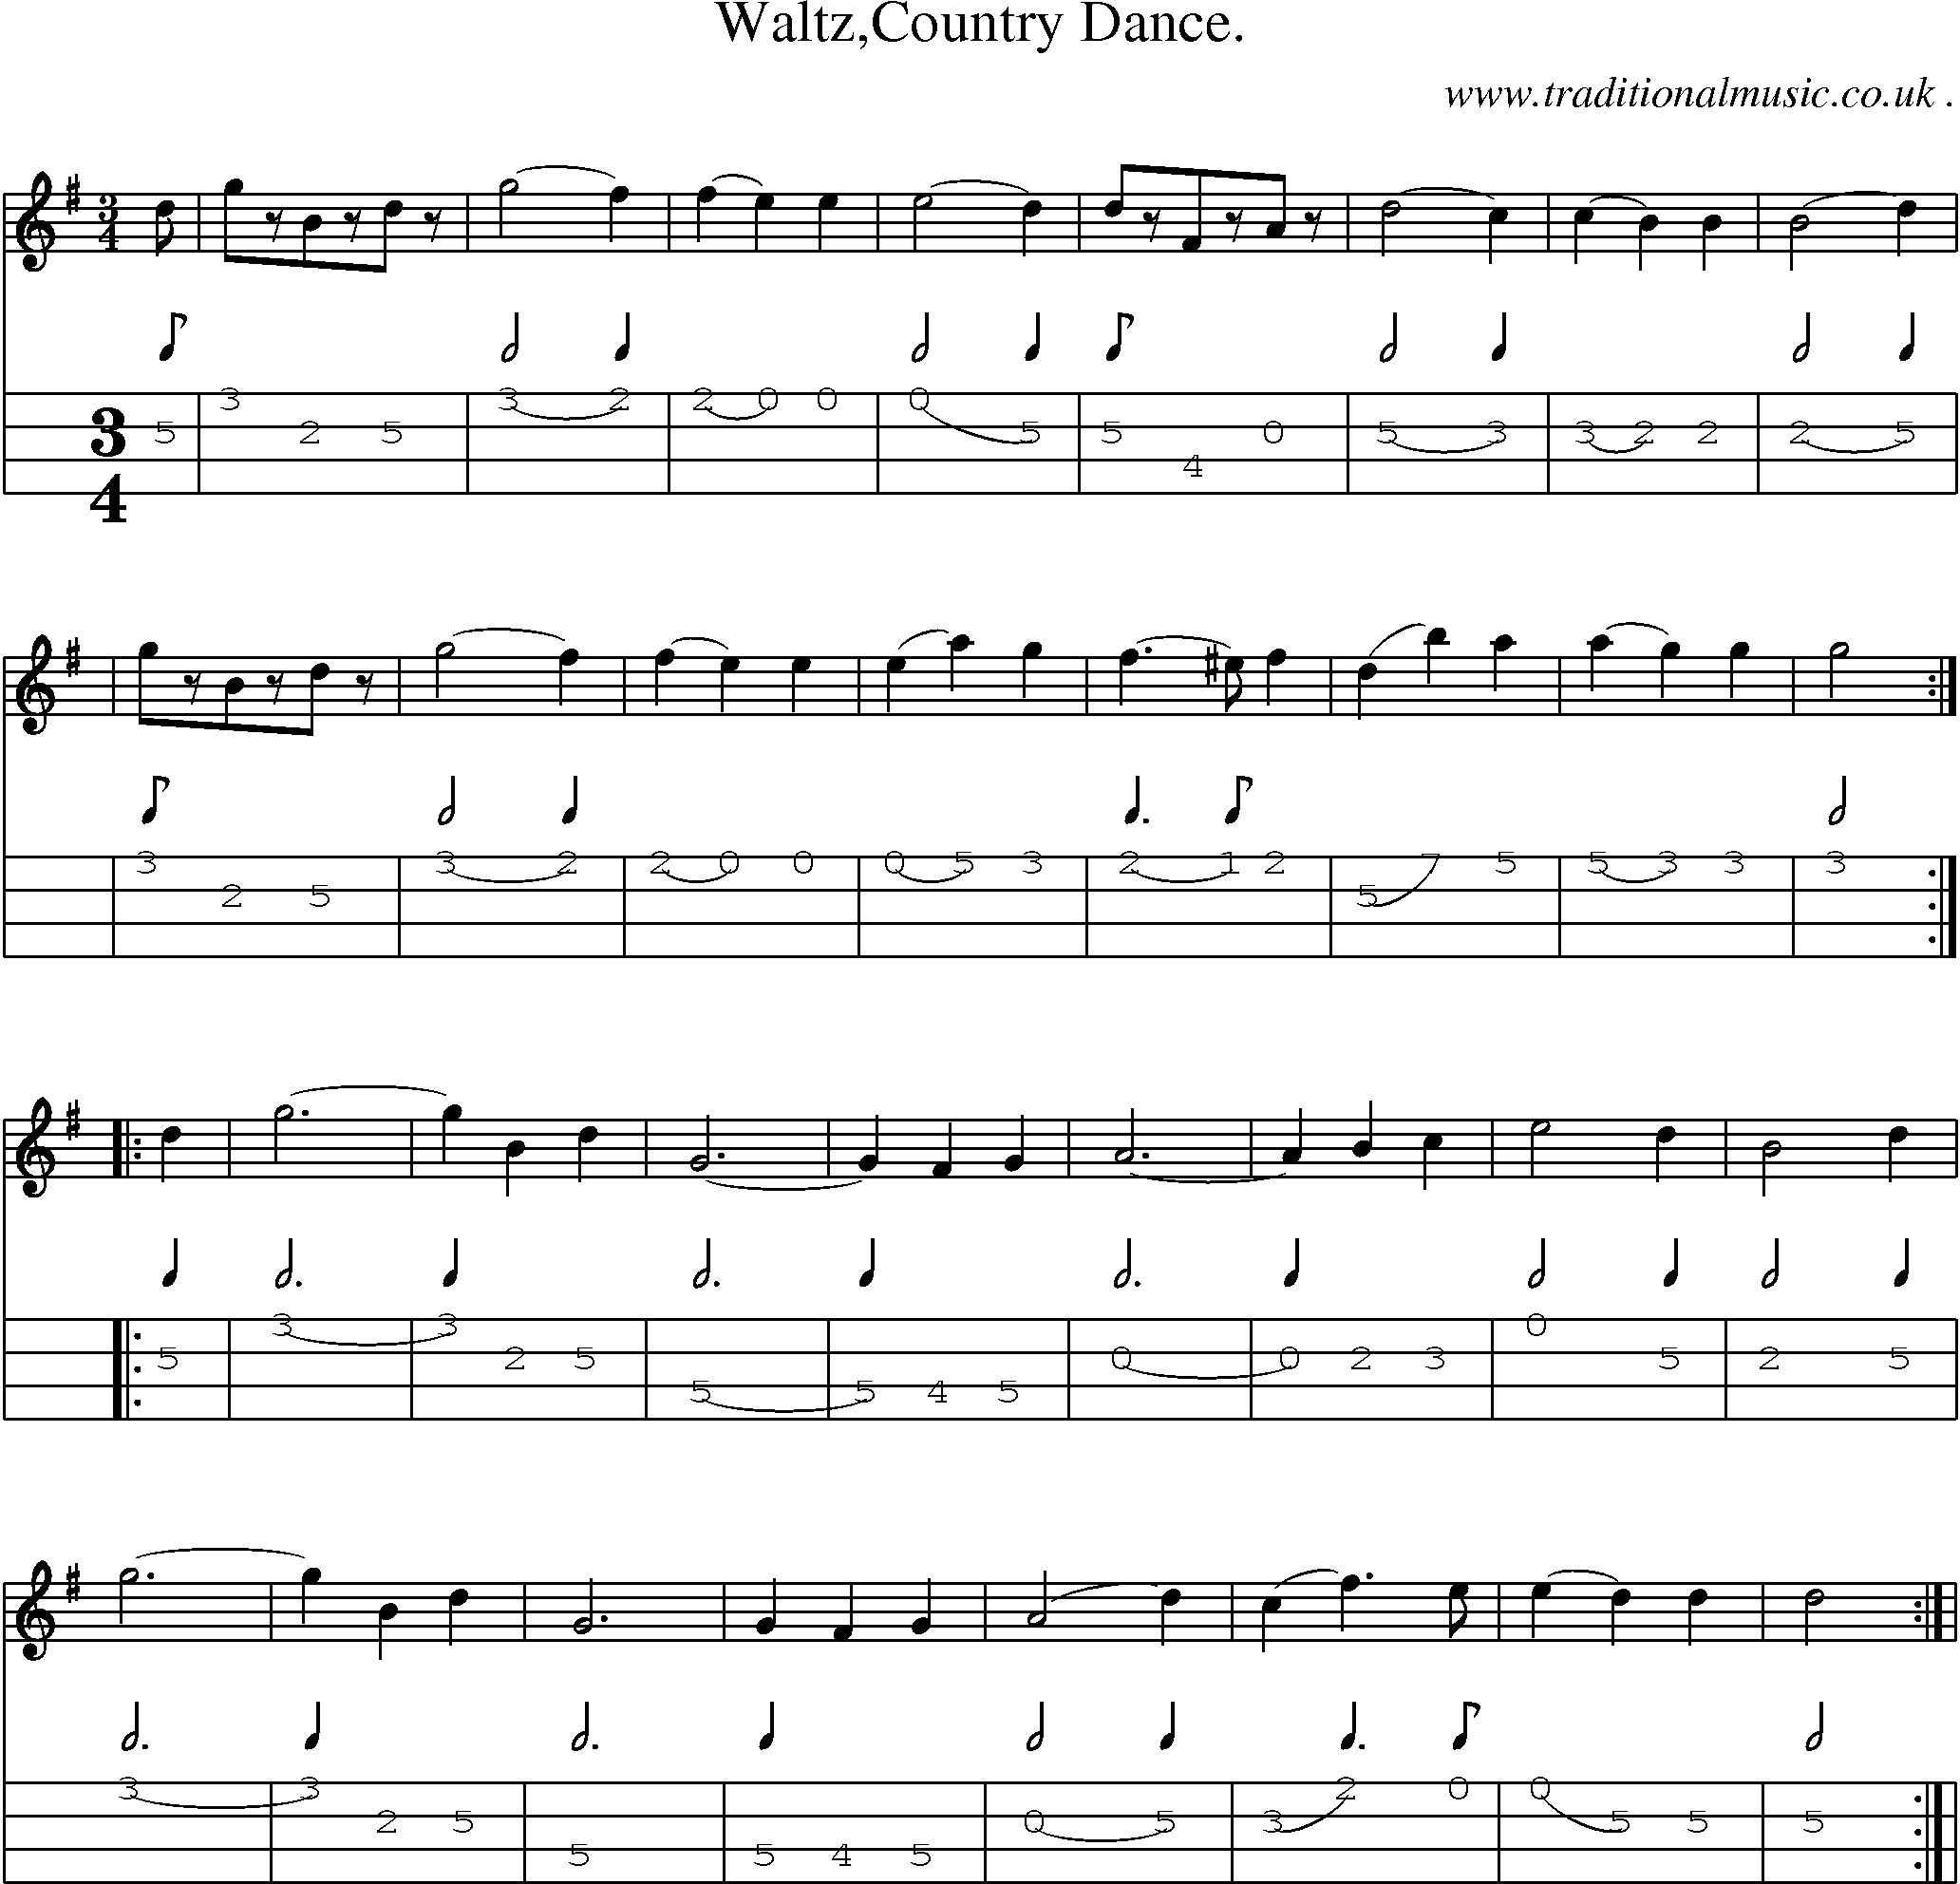 Sheet-Music and Mandolin Tabs for Waltzcountry Dance